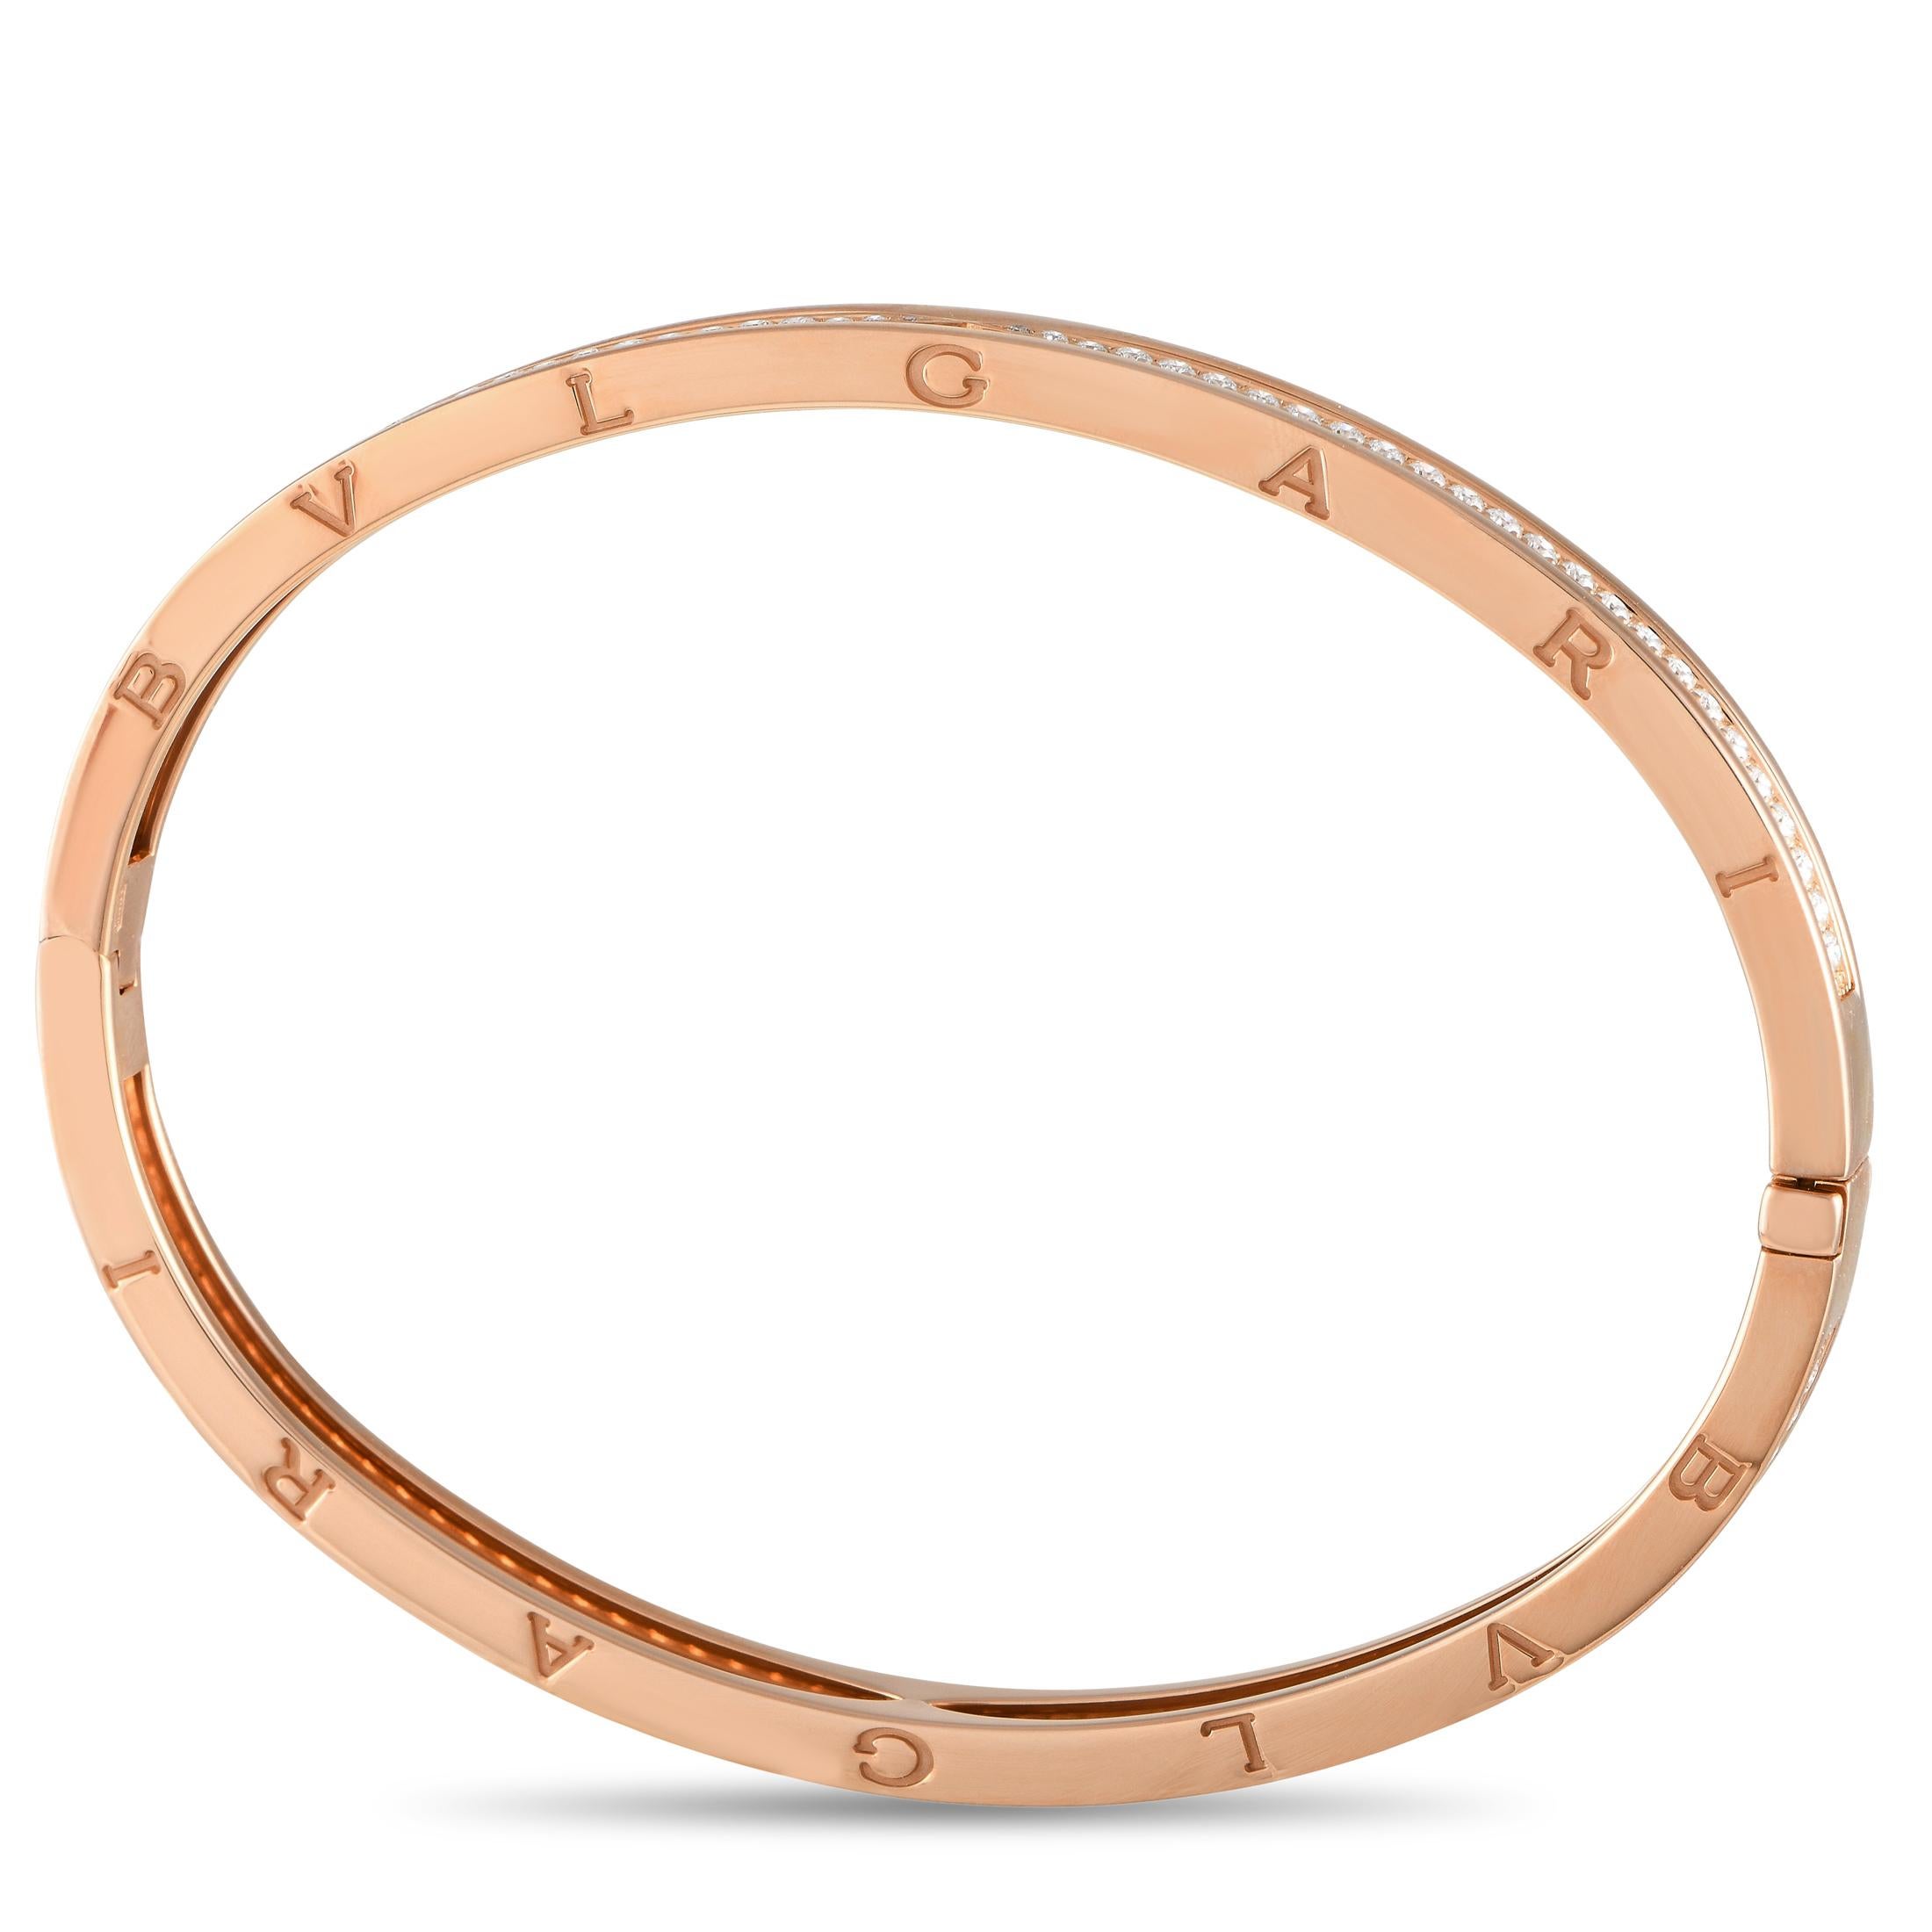 Bvlgari B.Zero1 18K Rose Gold 1.41ct Diamond Bracelet Size Large BV03-012524 In Excellent Condition For Sale In Southampton, PA